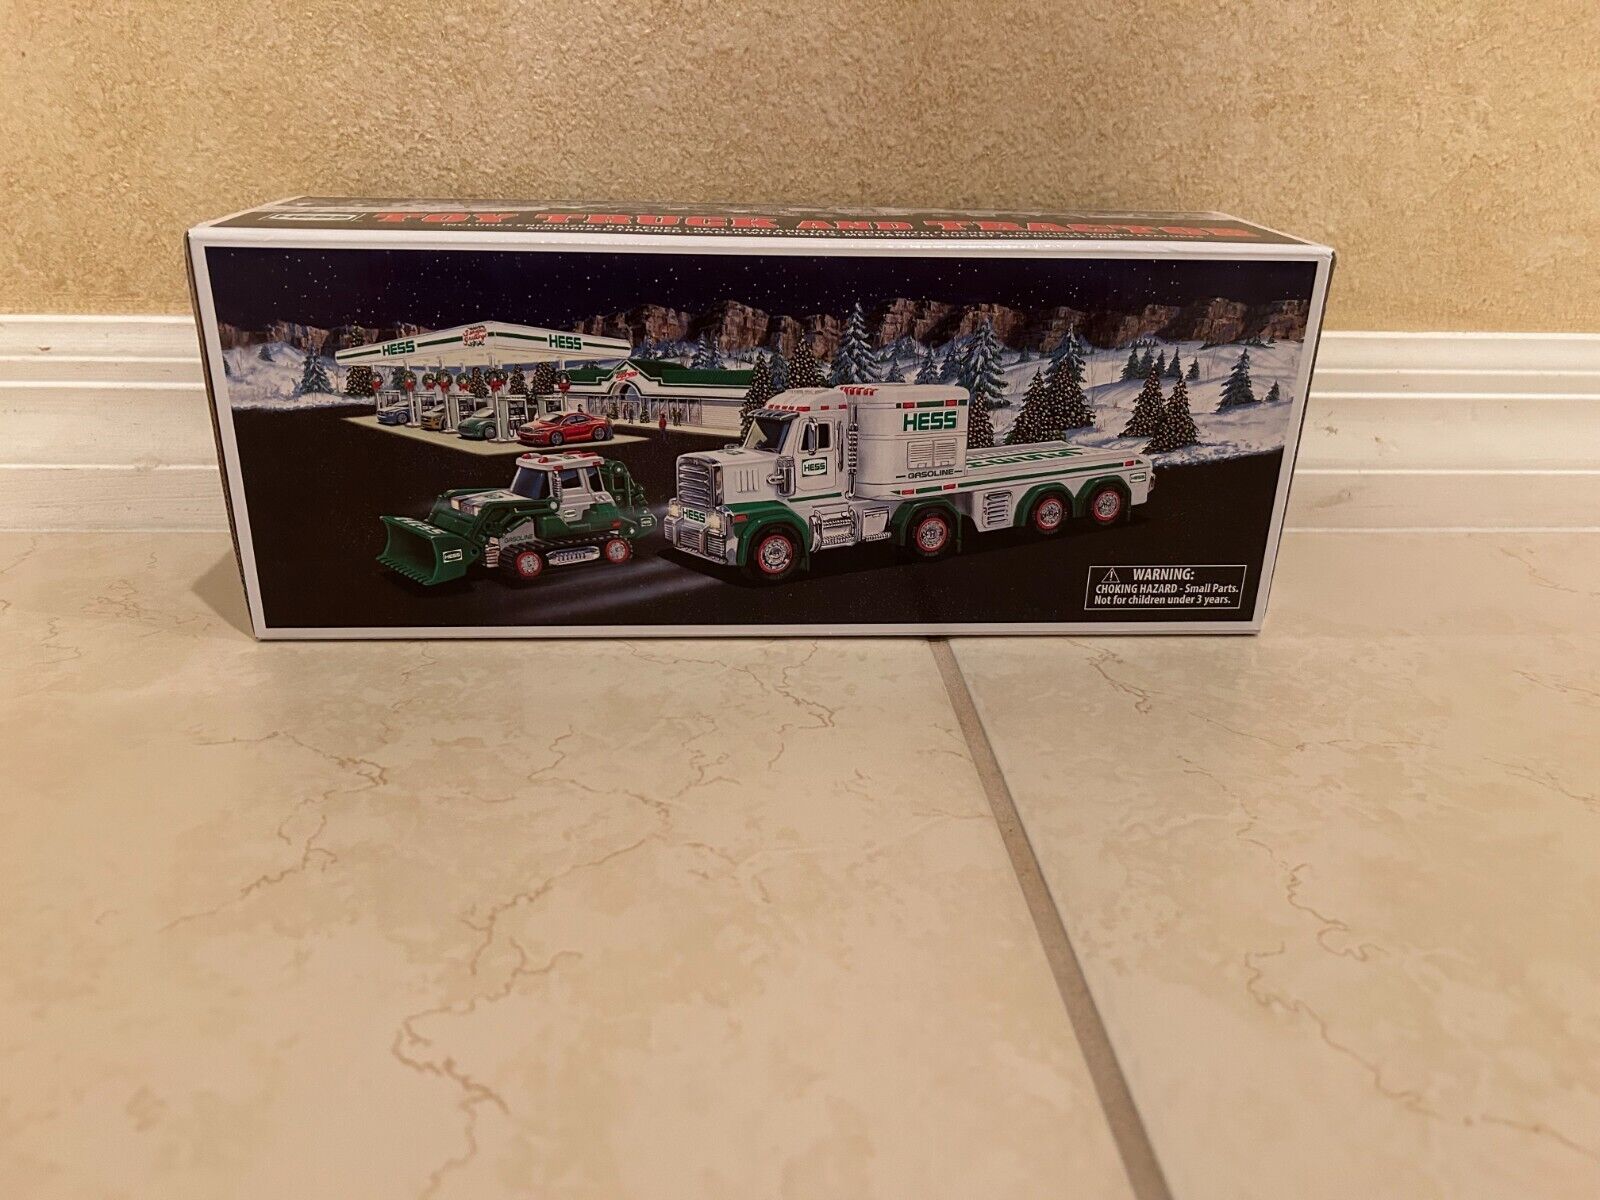 2013 Hess Toy Truck And Tractor New In Box And In Pristine Condition